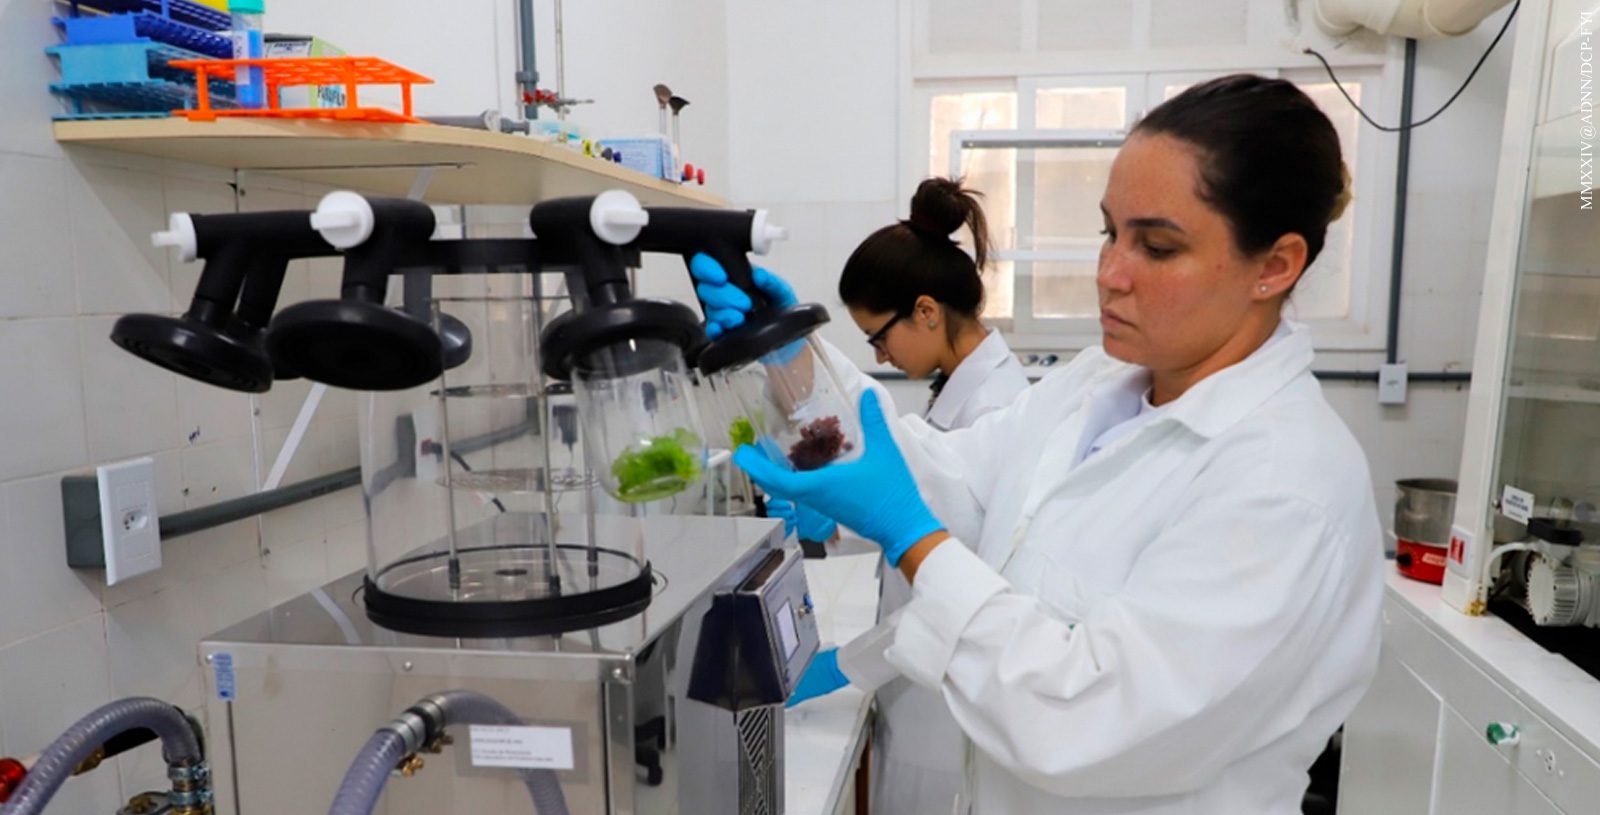 The growing role of women in science and technology in the Brazilian Navy